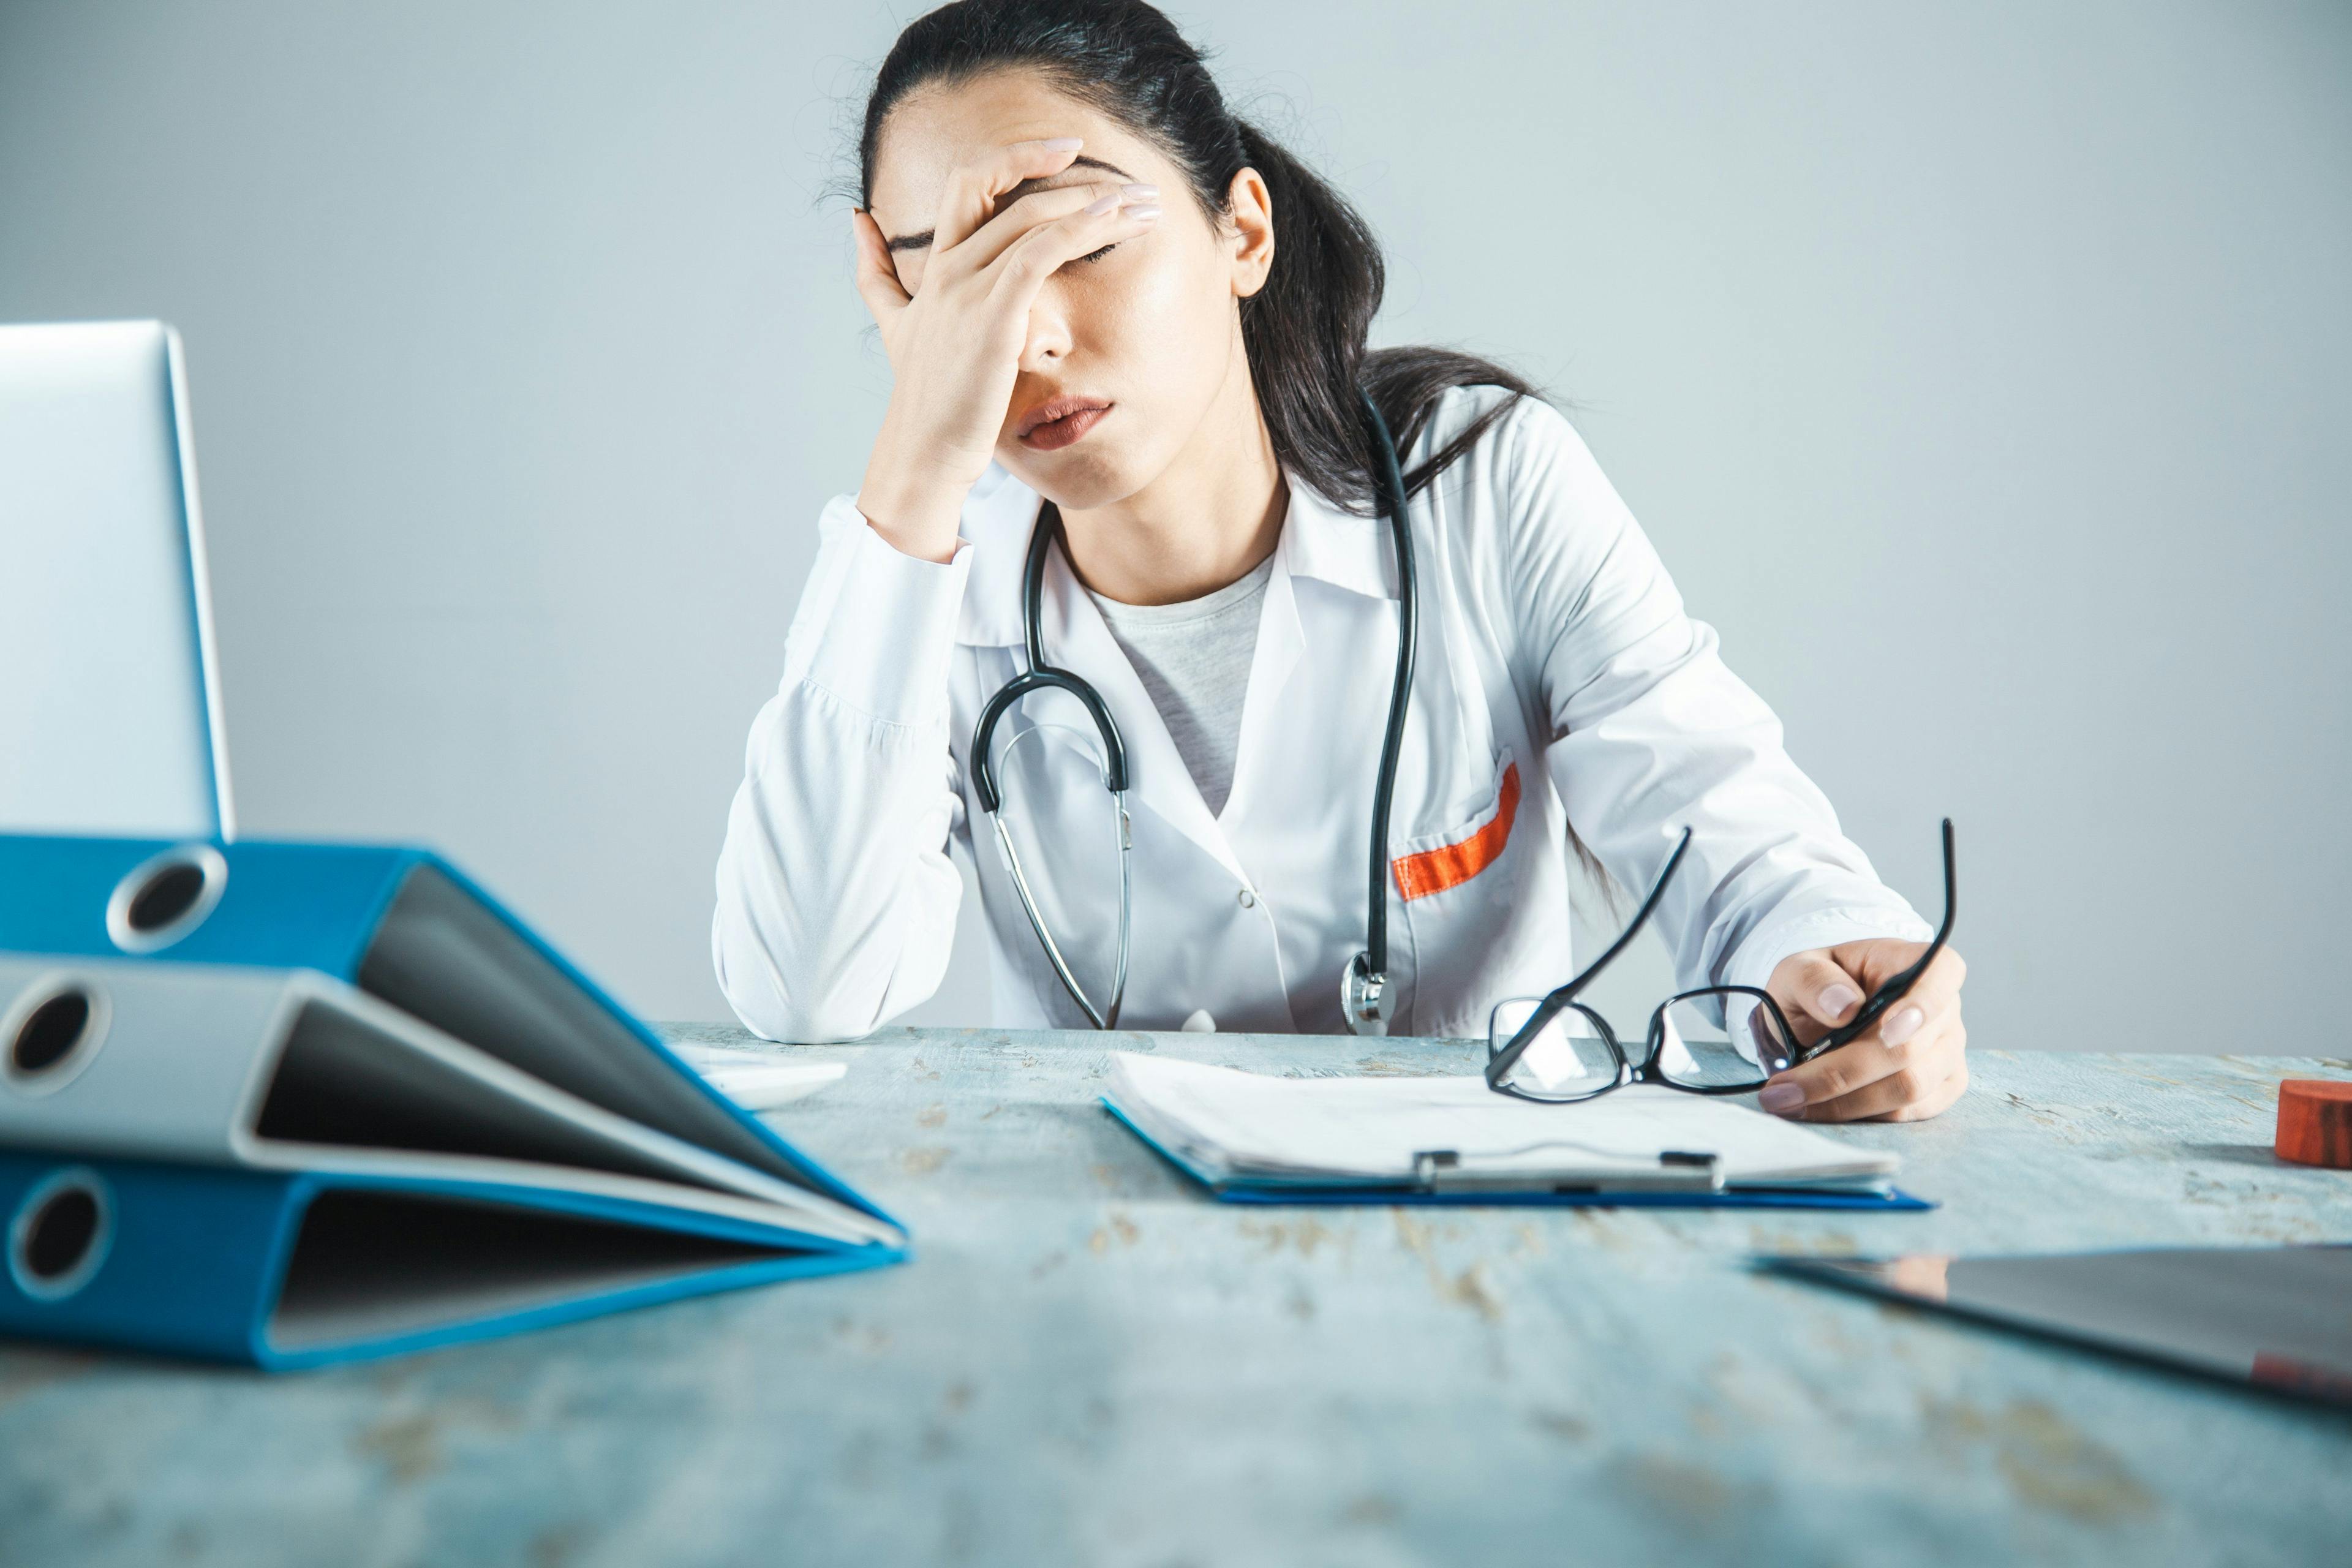 Doctors need more support, not penalties, from CMS